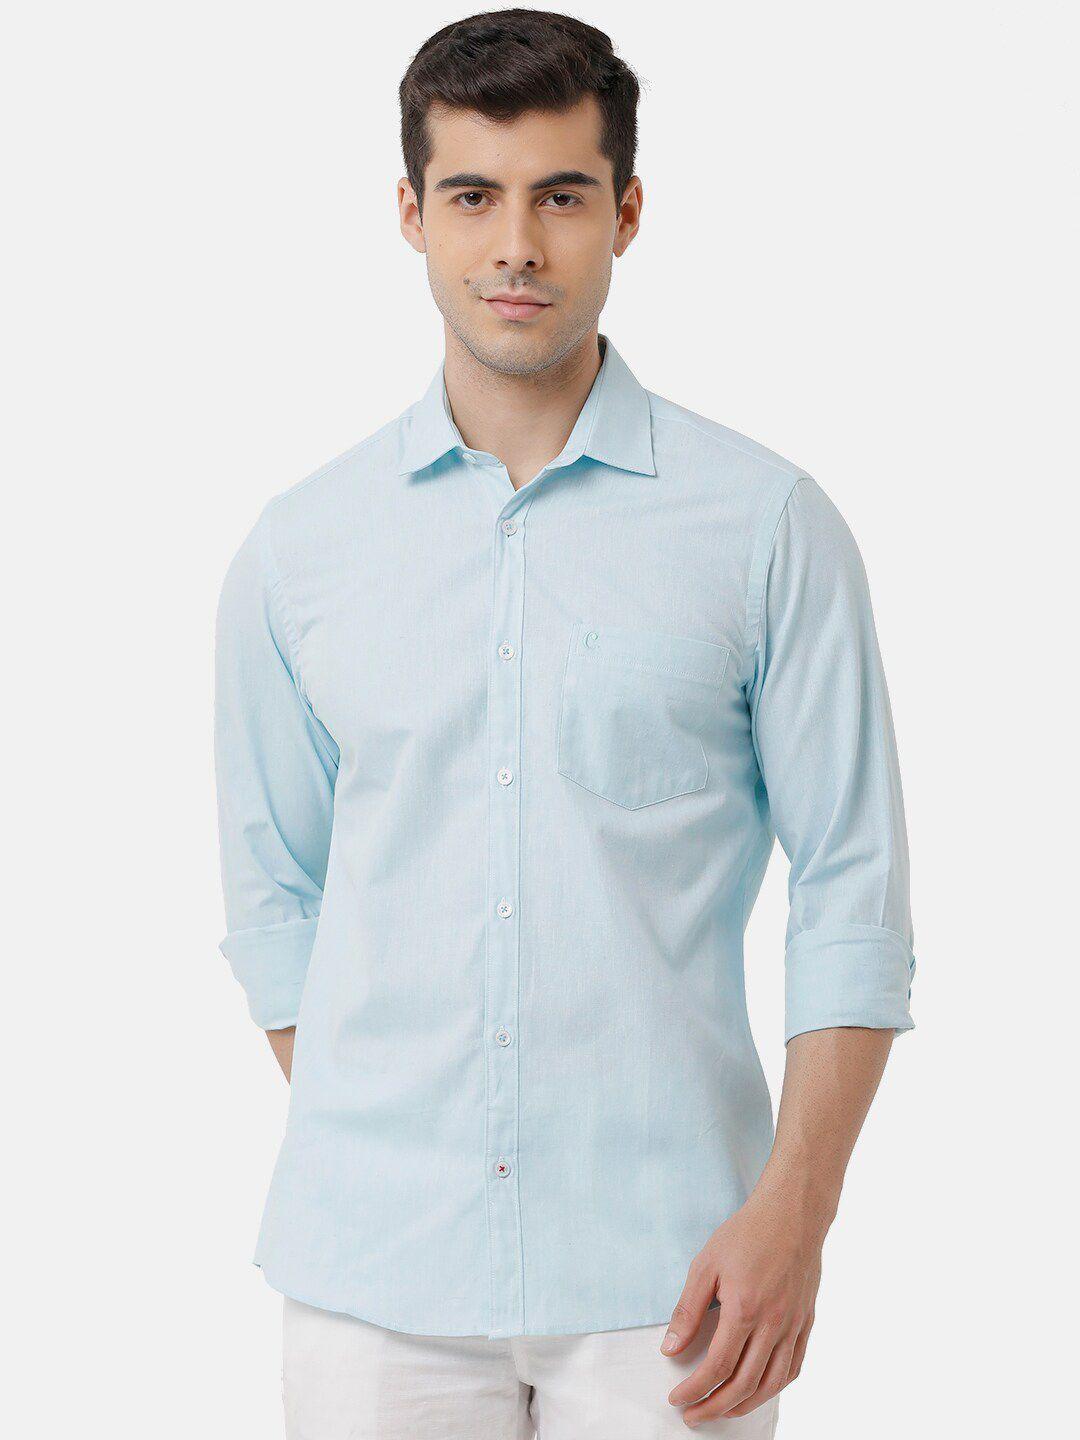 cavallo-by-linen-club-men-turquoise-blue-checked-casual-shirt